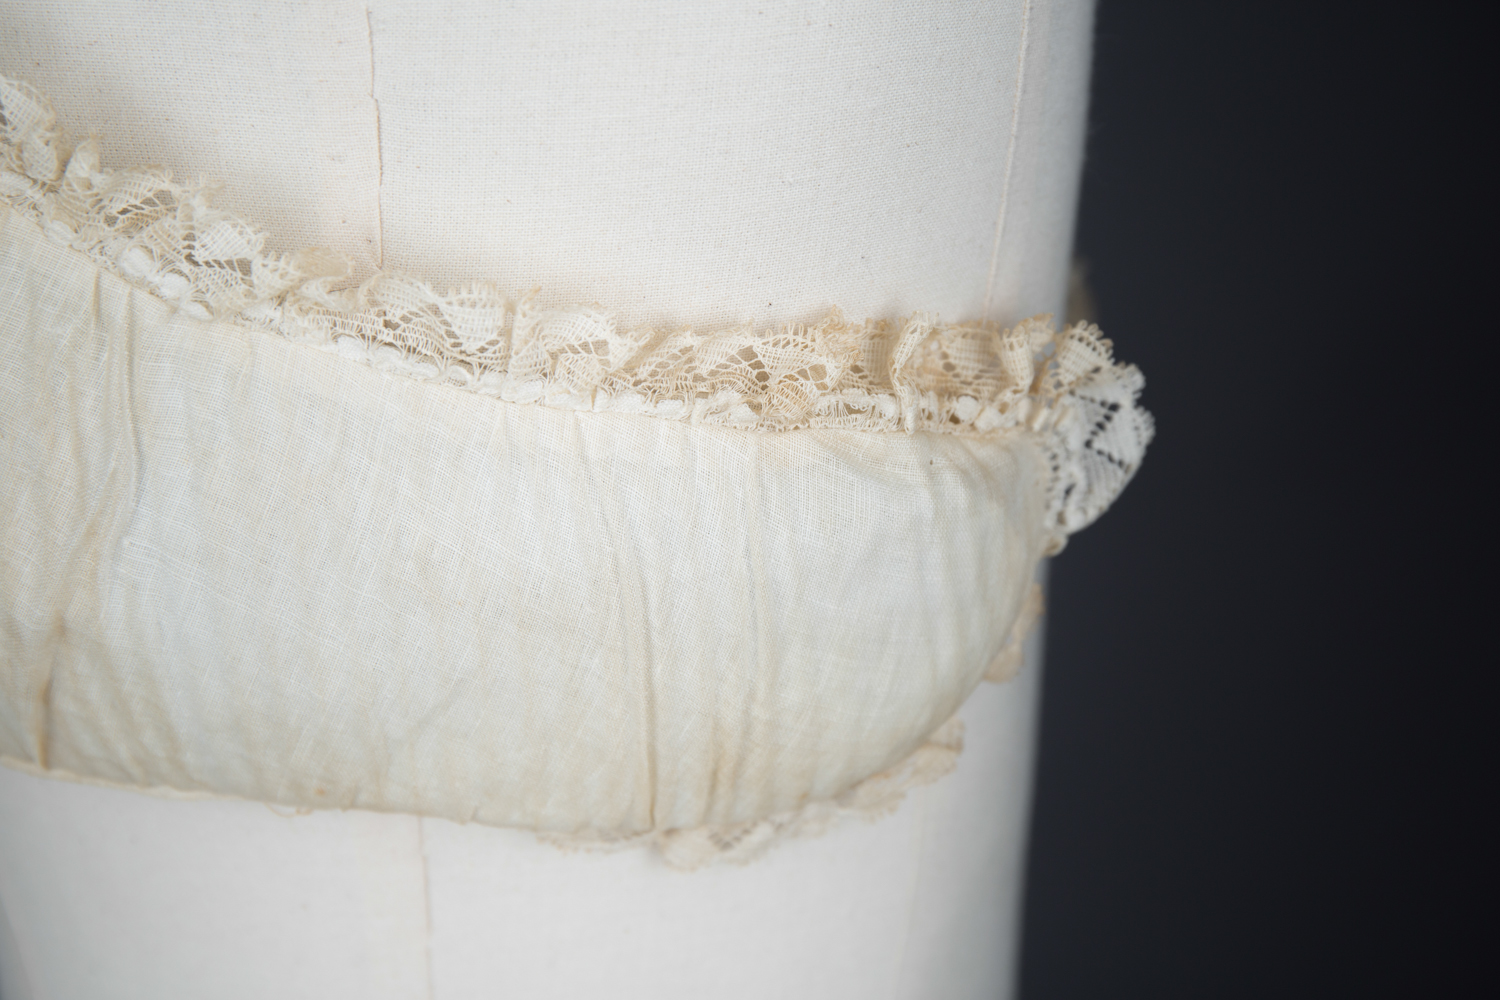 Cotton Padded Bust Improver With Lace Trim, c. 1880-1900s. The Underpinnings Museum. Photography by Tigz Rice.